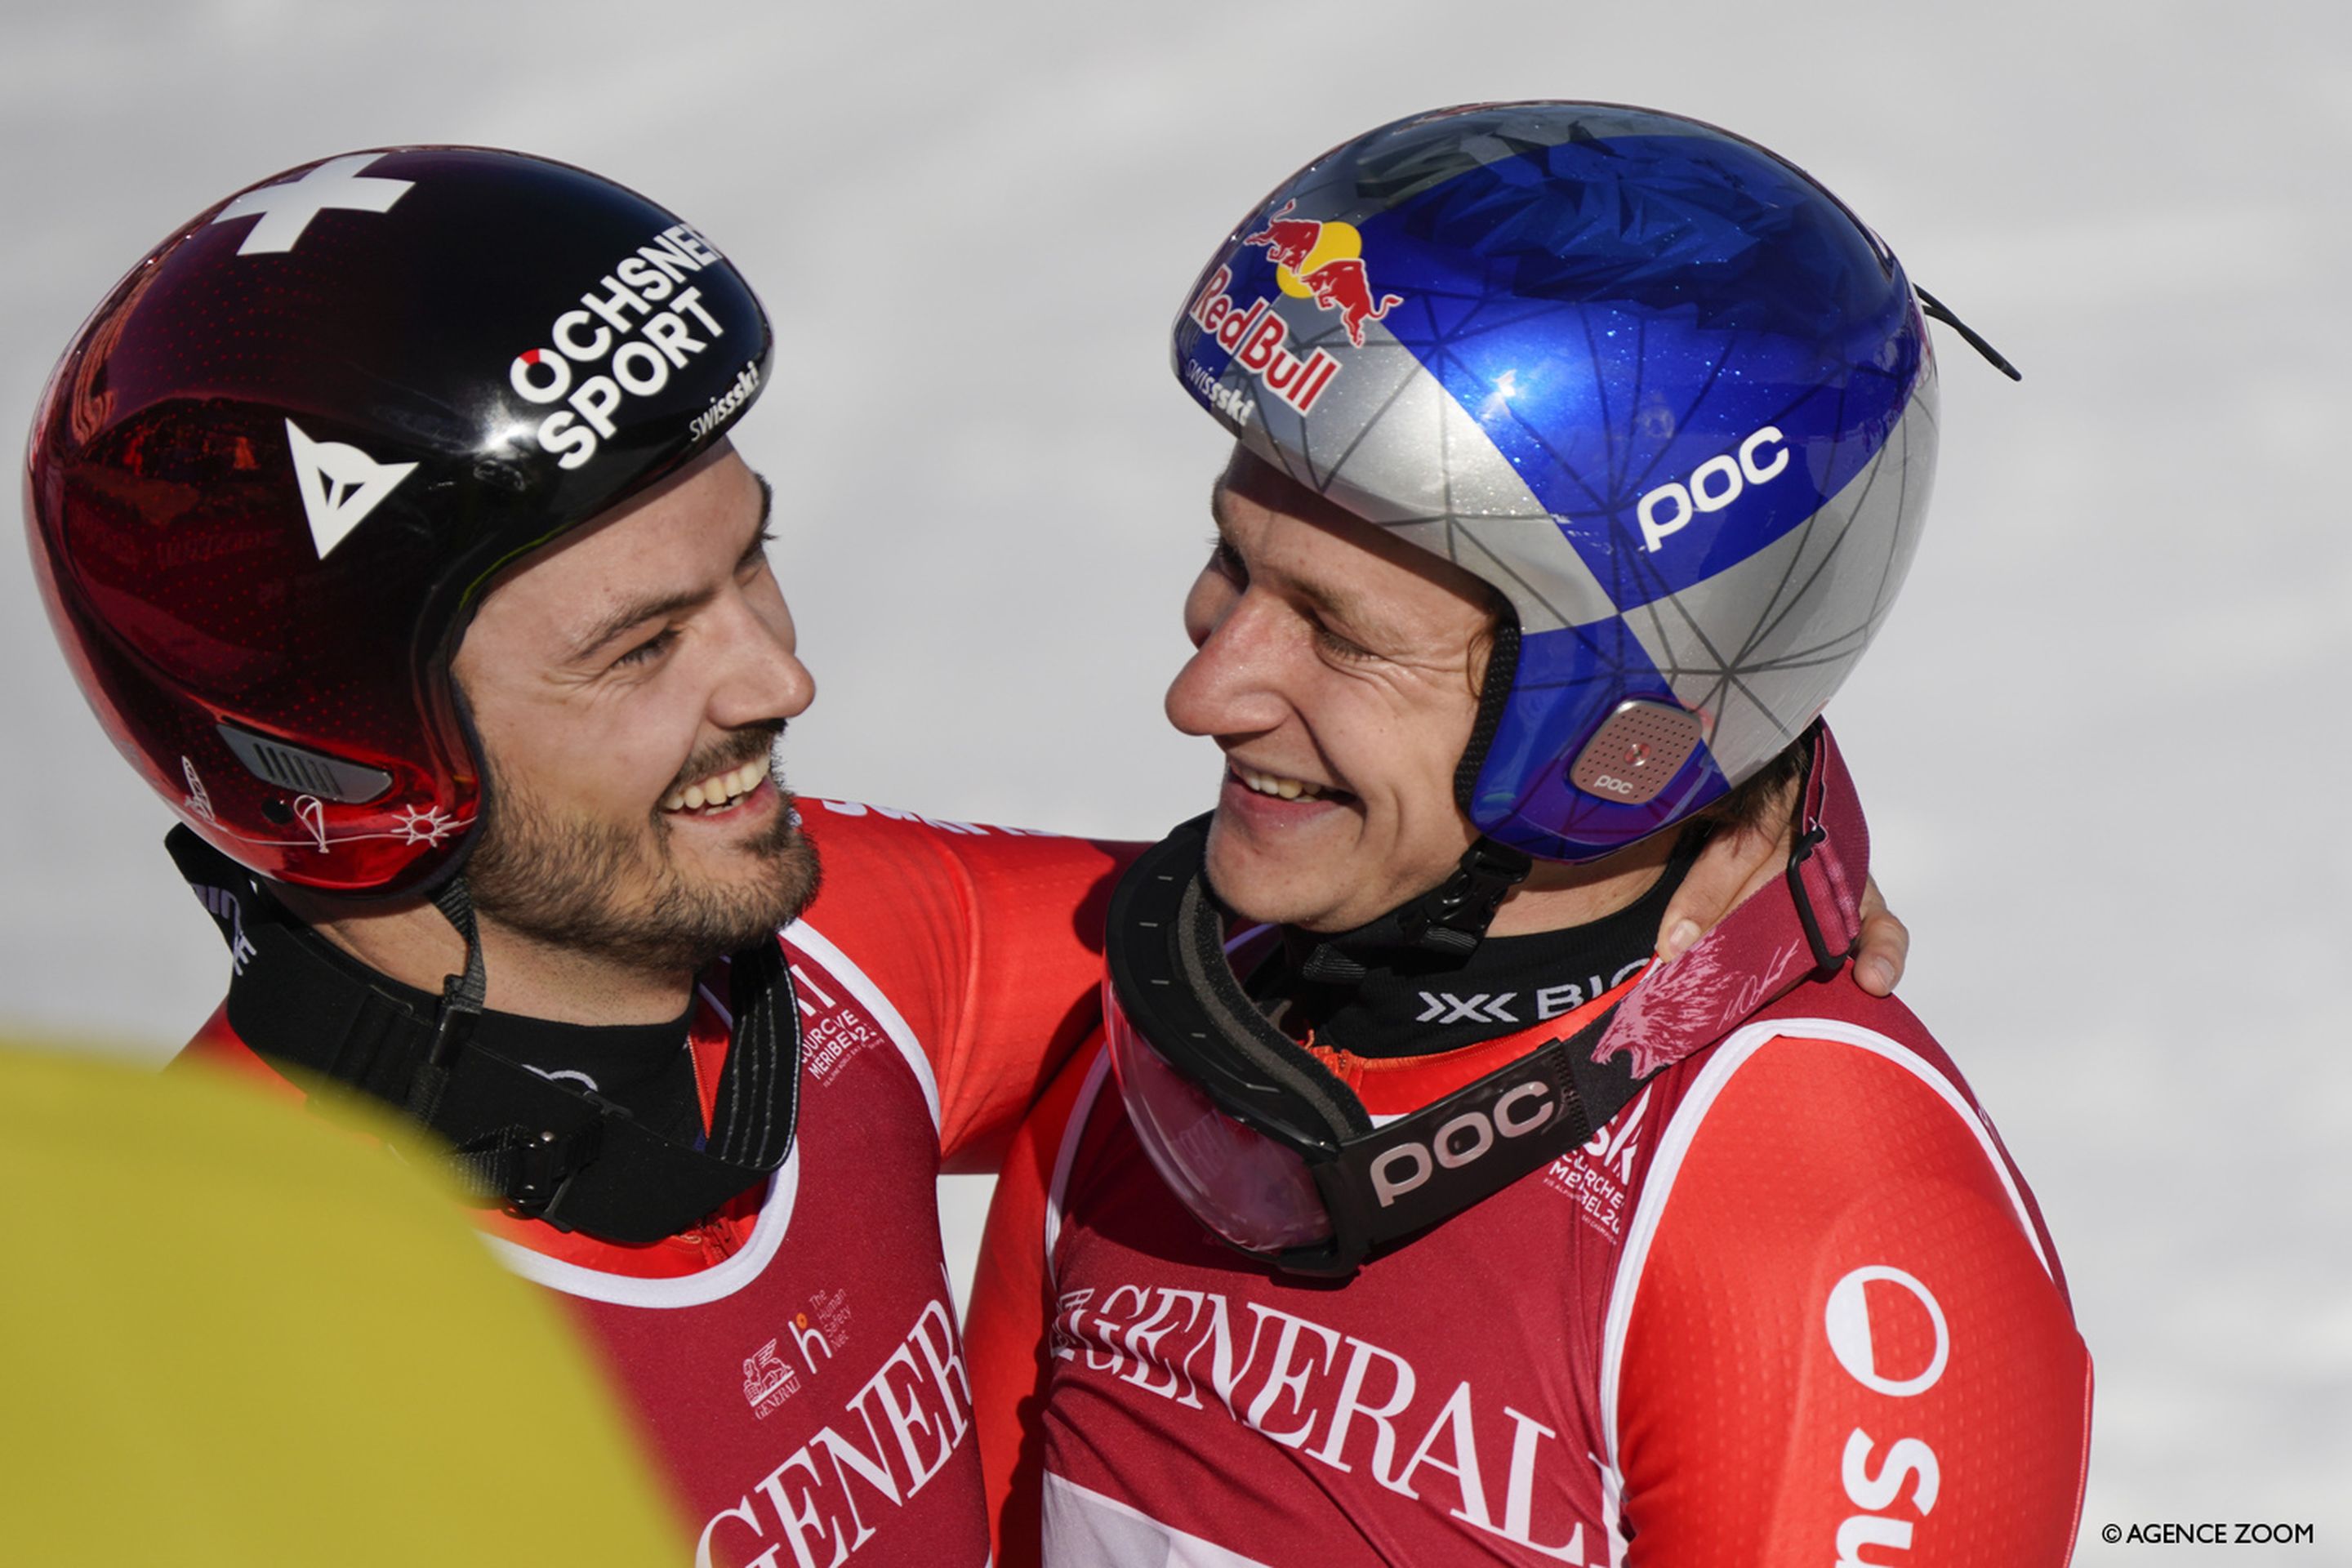 It was a great day for Swiss ski fans, with Loic Meillard taking silver (Agence Presse)